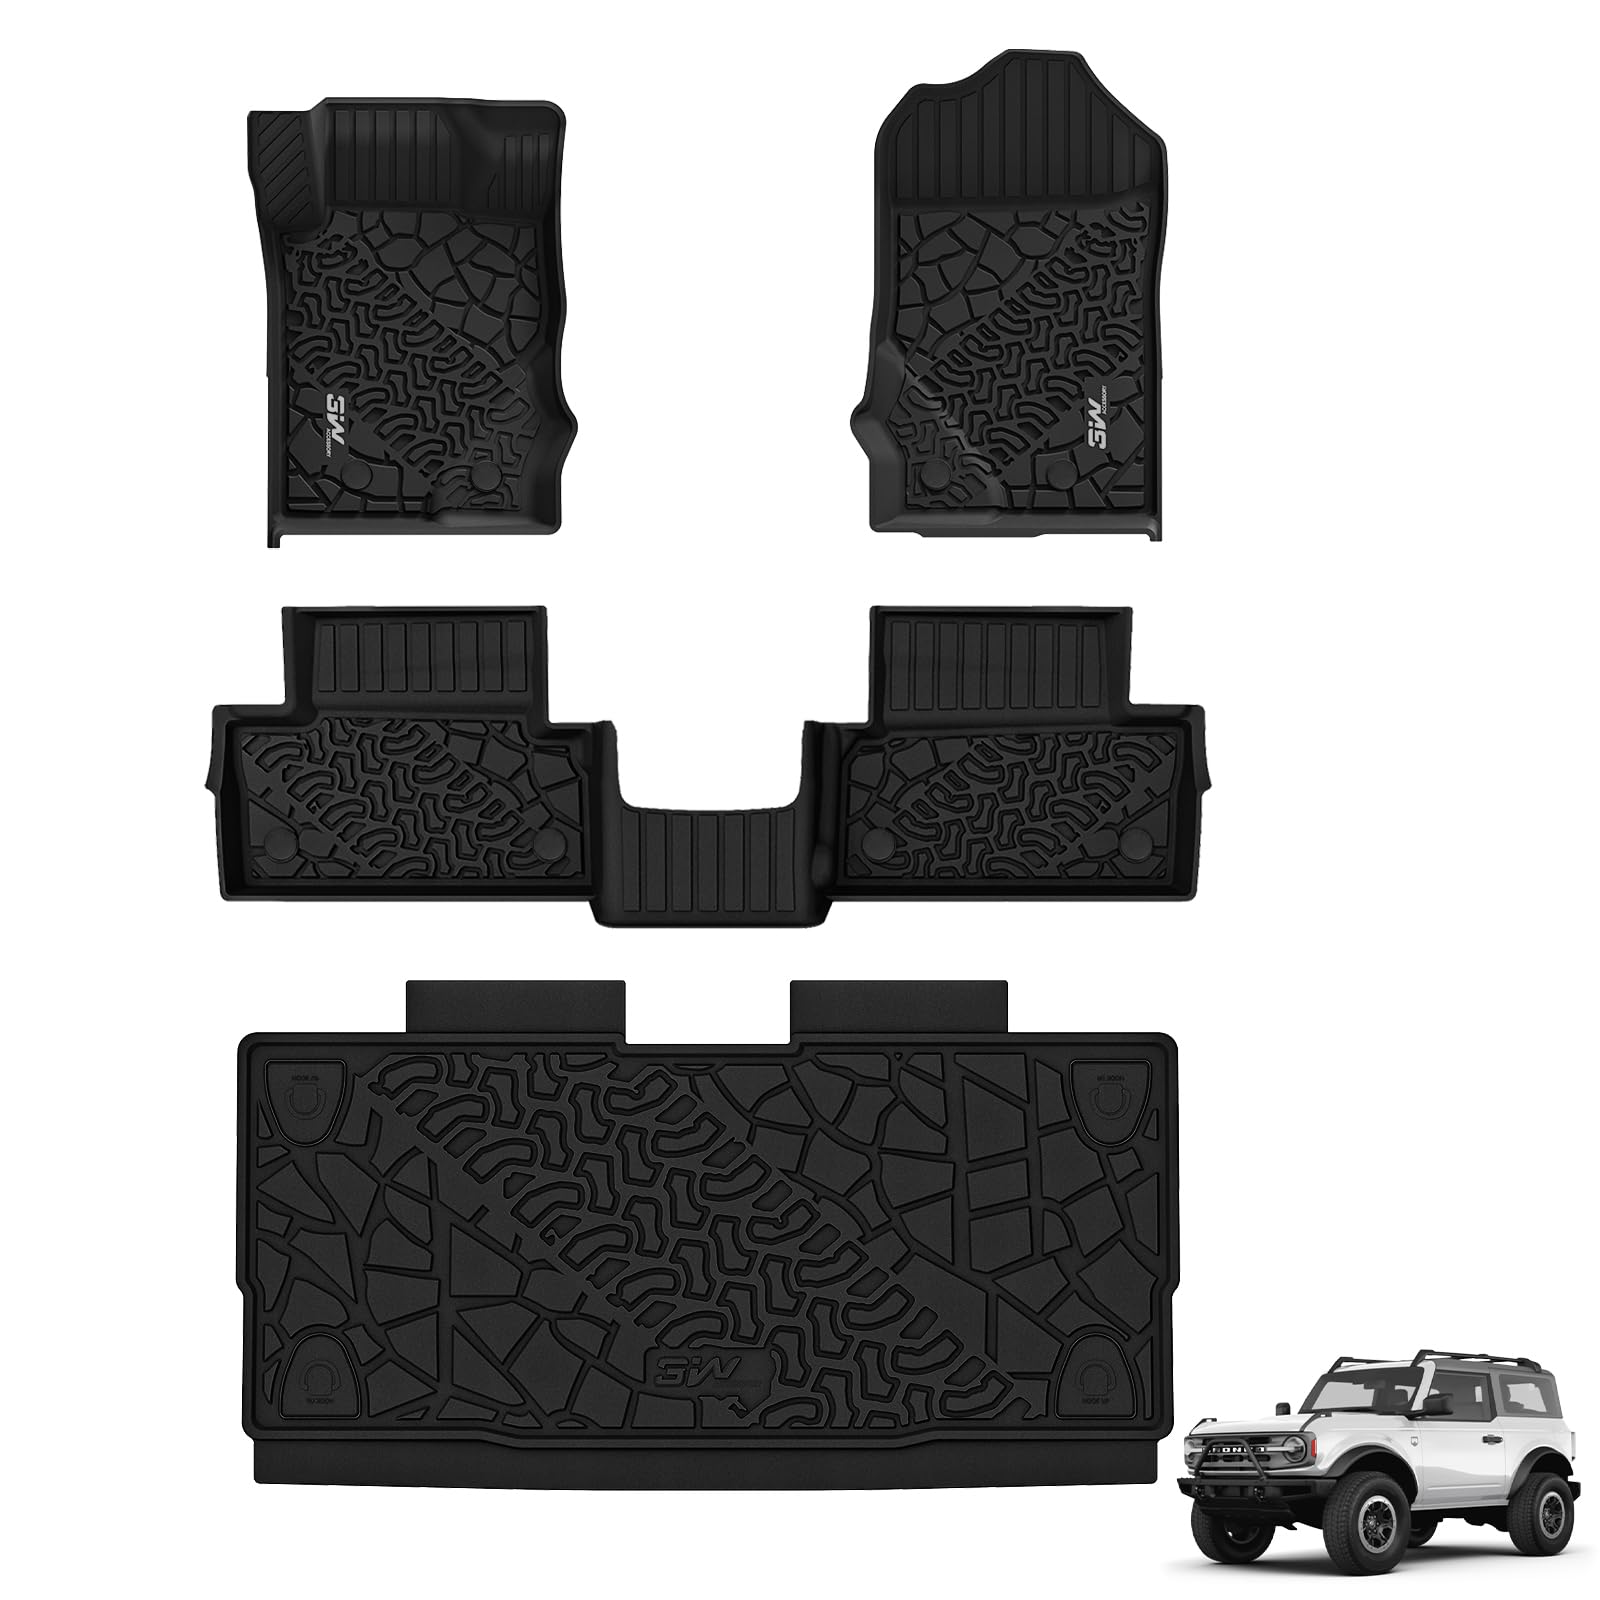 3W Ford Bronco 2-Door 2021-2023 Floor Mats Trunk Mats TPE Material & All-Weather Protection Vehicles & Parts 3Wliners 2021-2023 2-Door 2021-2023 1st&2nd Row Mats+Trunk Mat